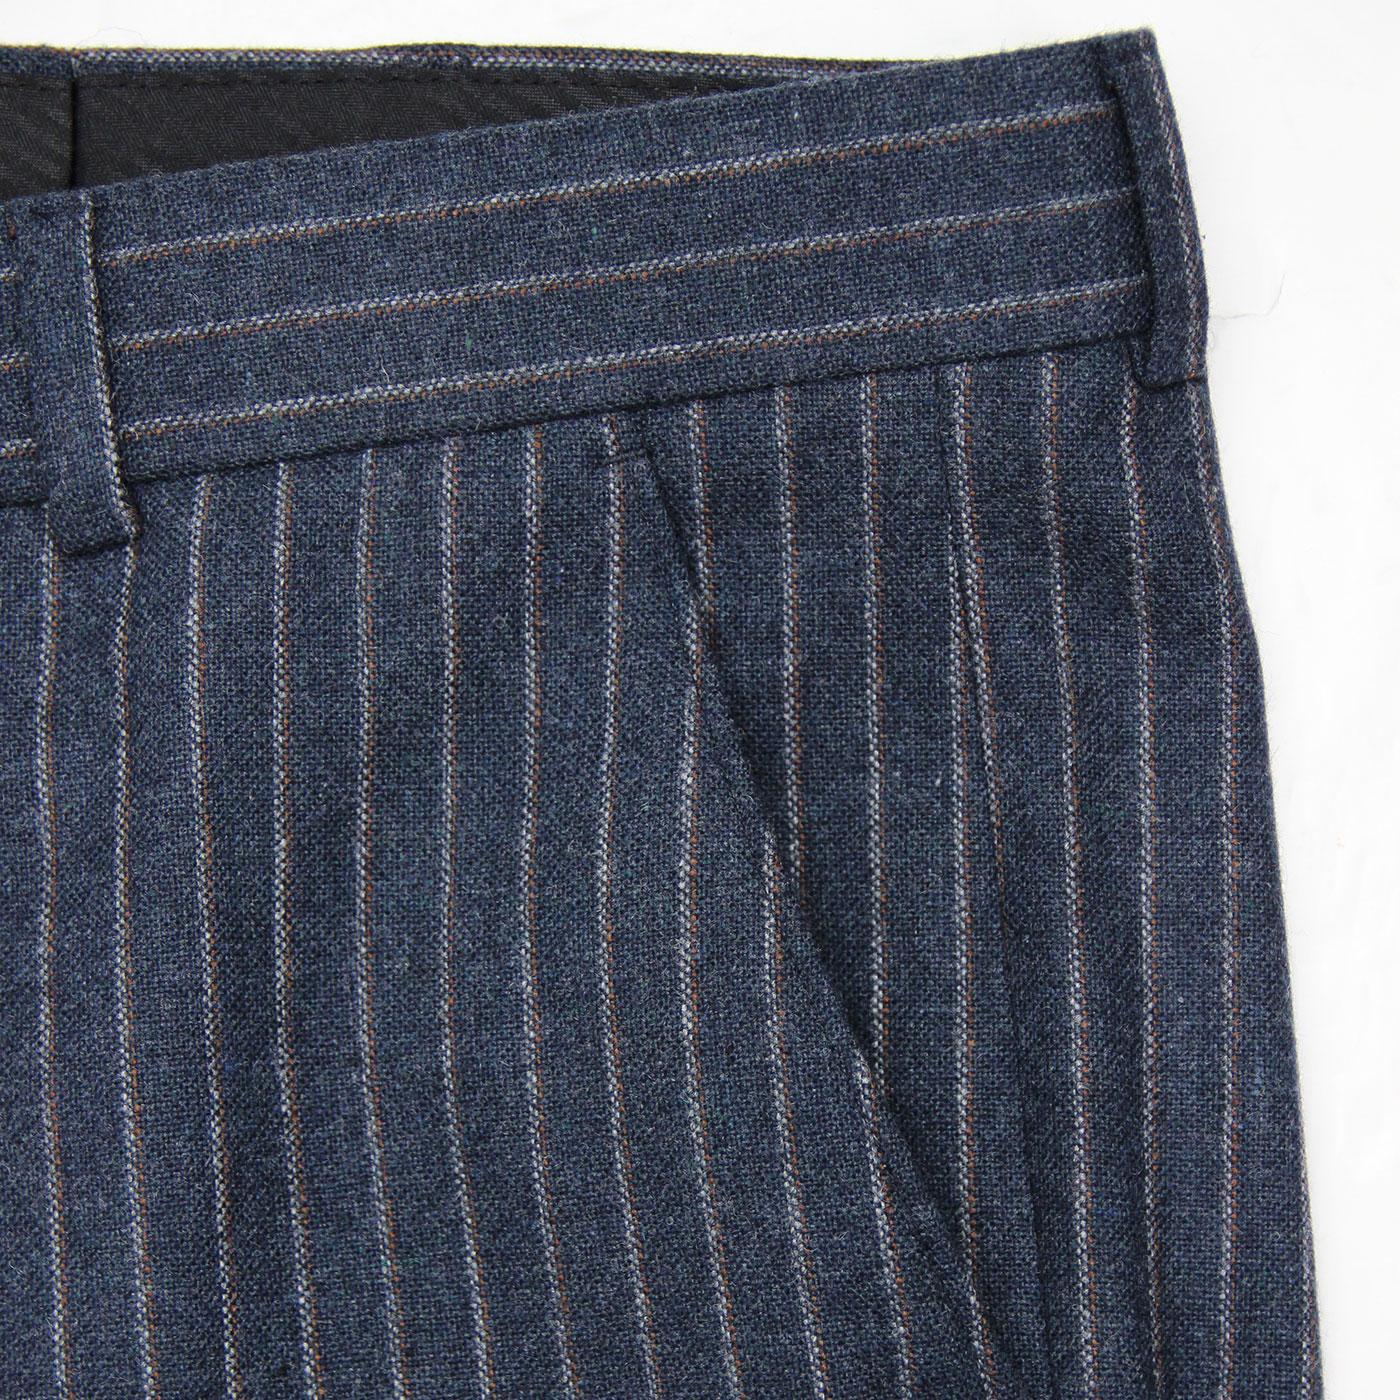 GIBSON LONDON Towergate Retro Mod Pinstripe Suit in Blue